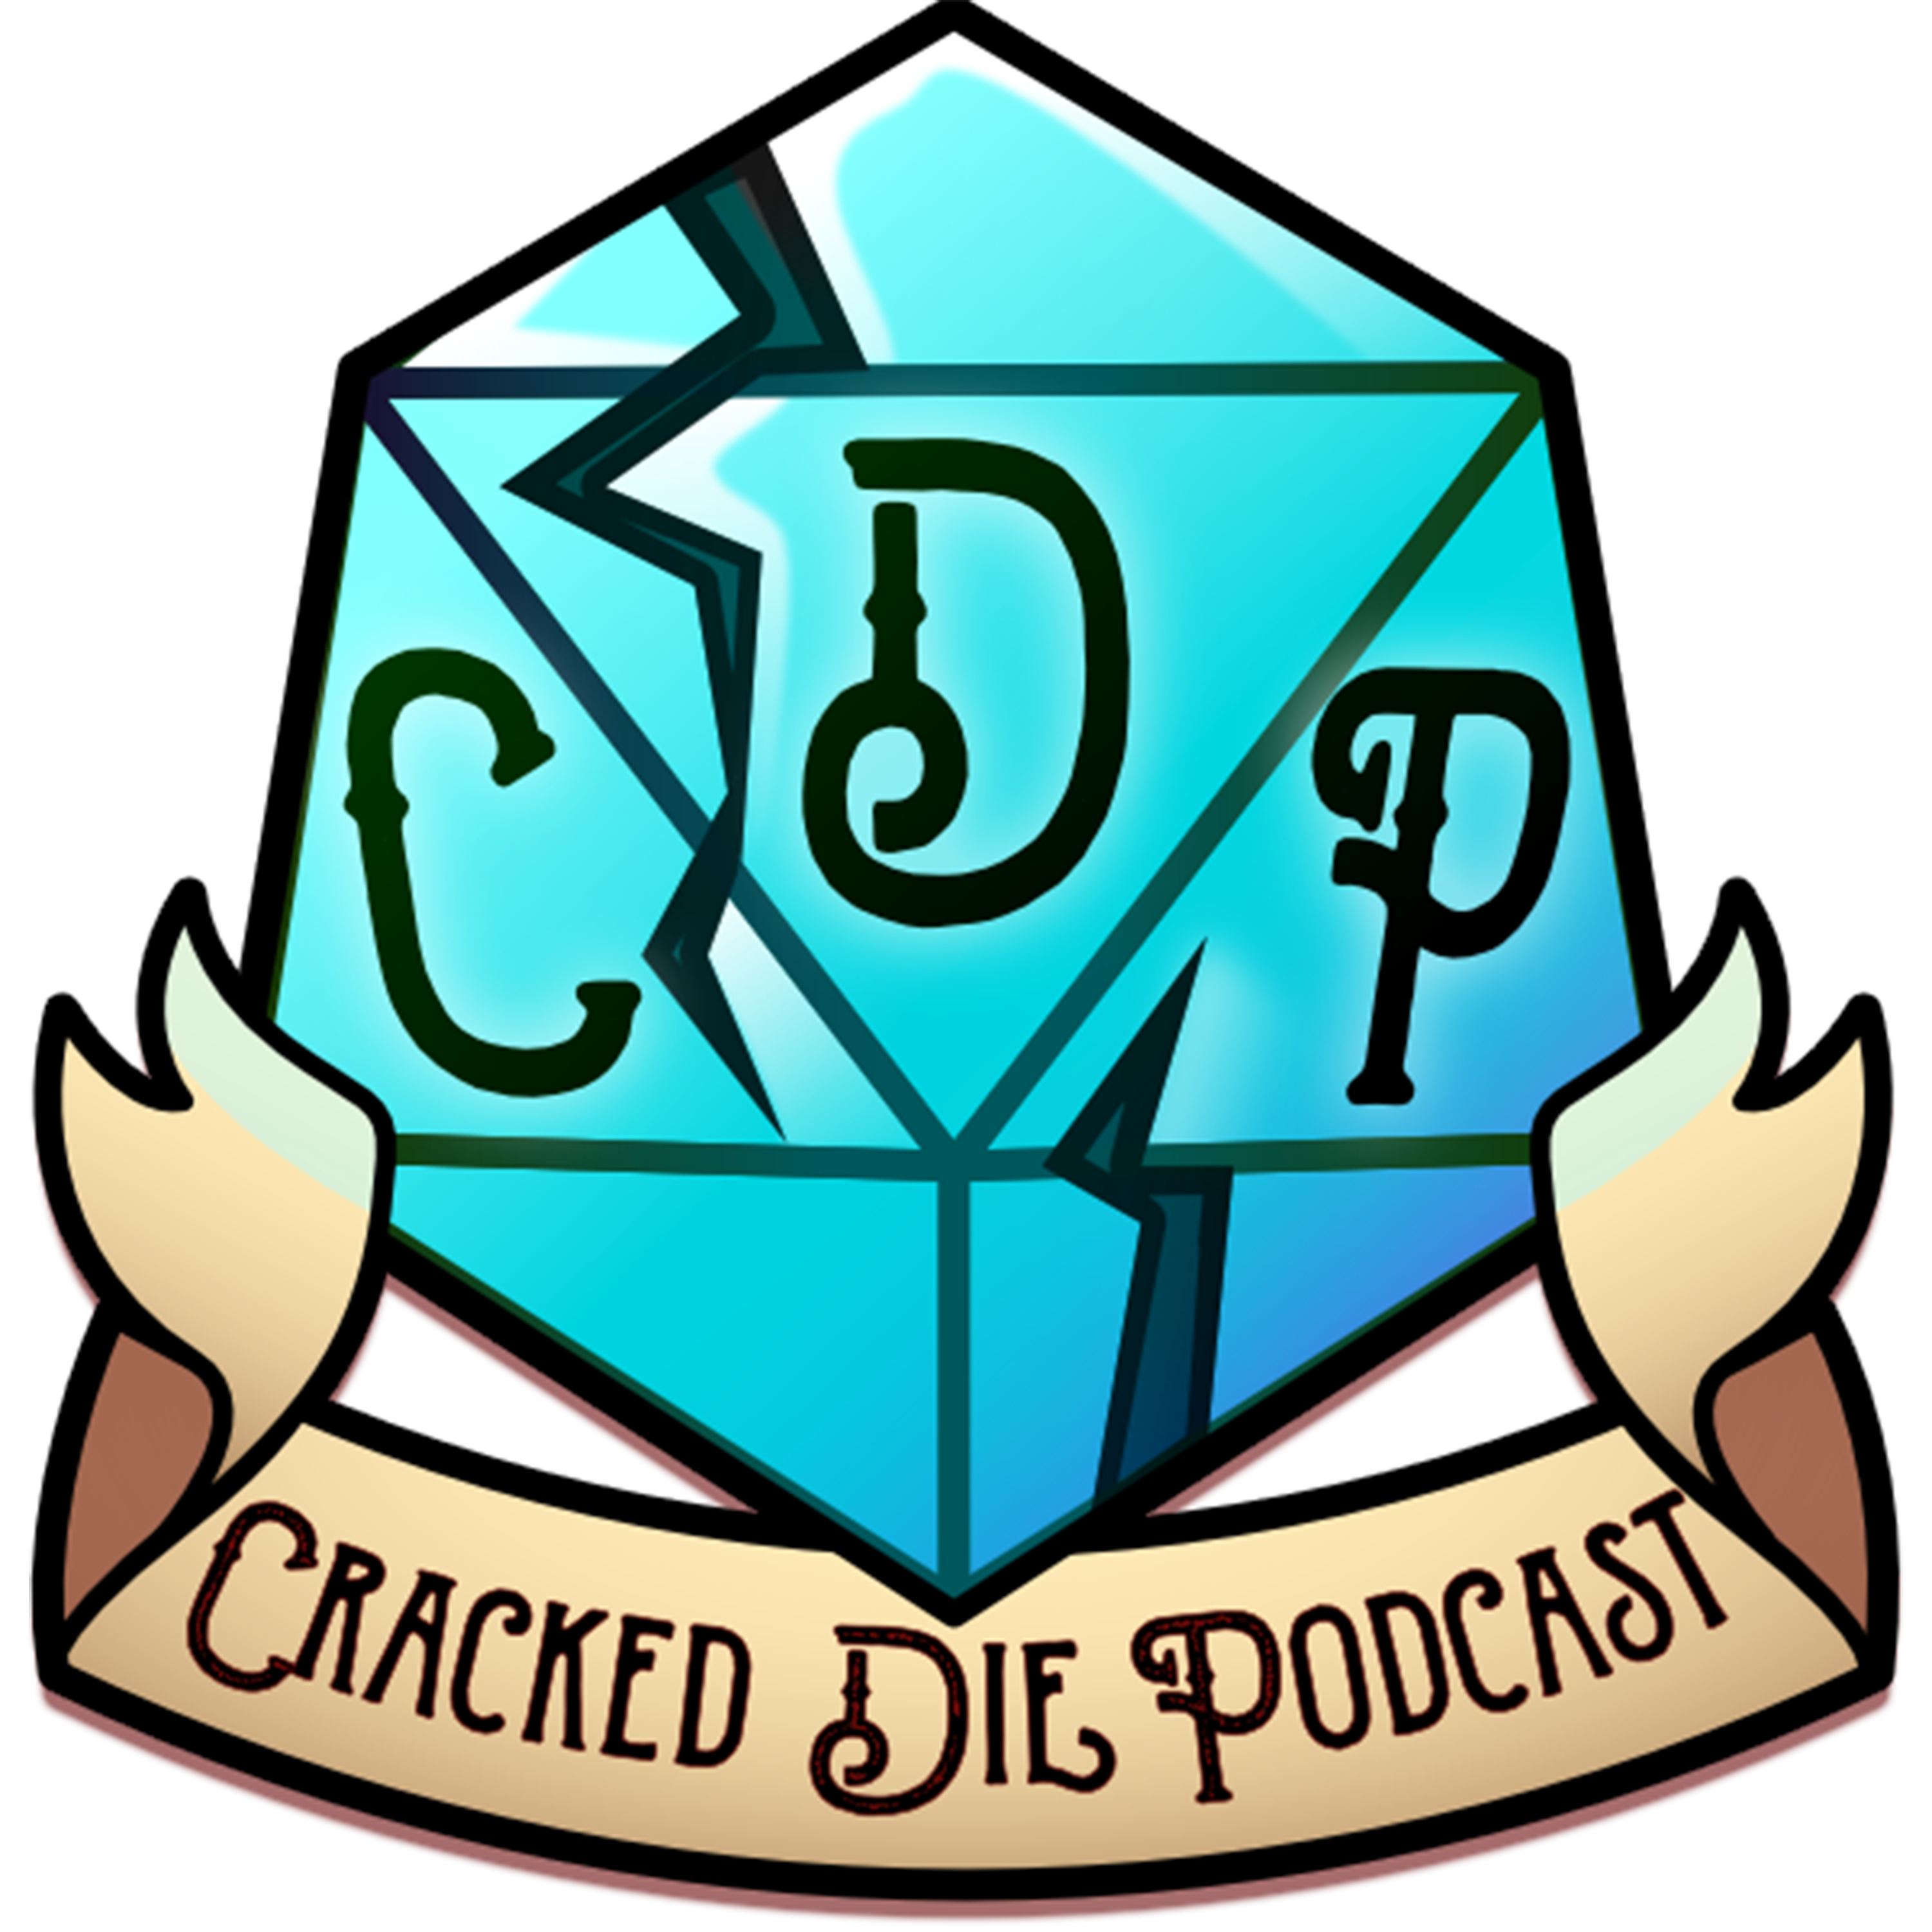 The Cracked Die Podcast - Episode 45a - Interlude